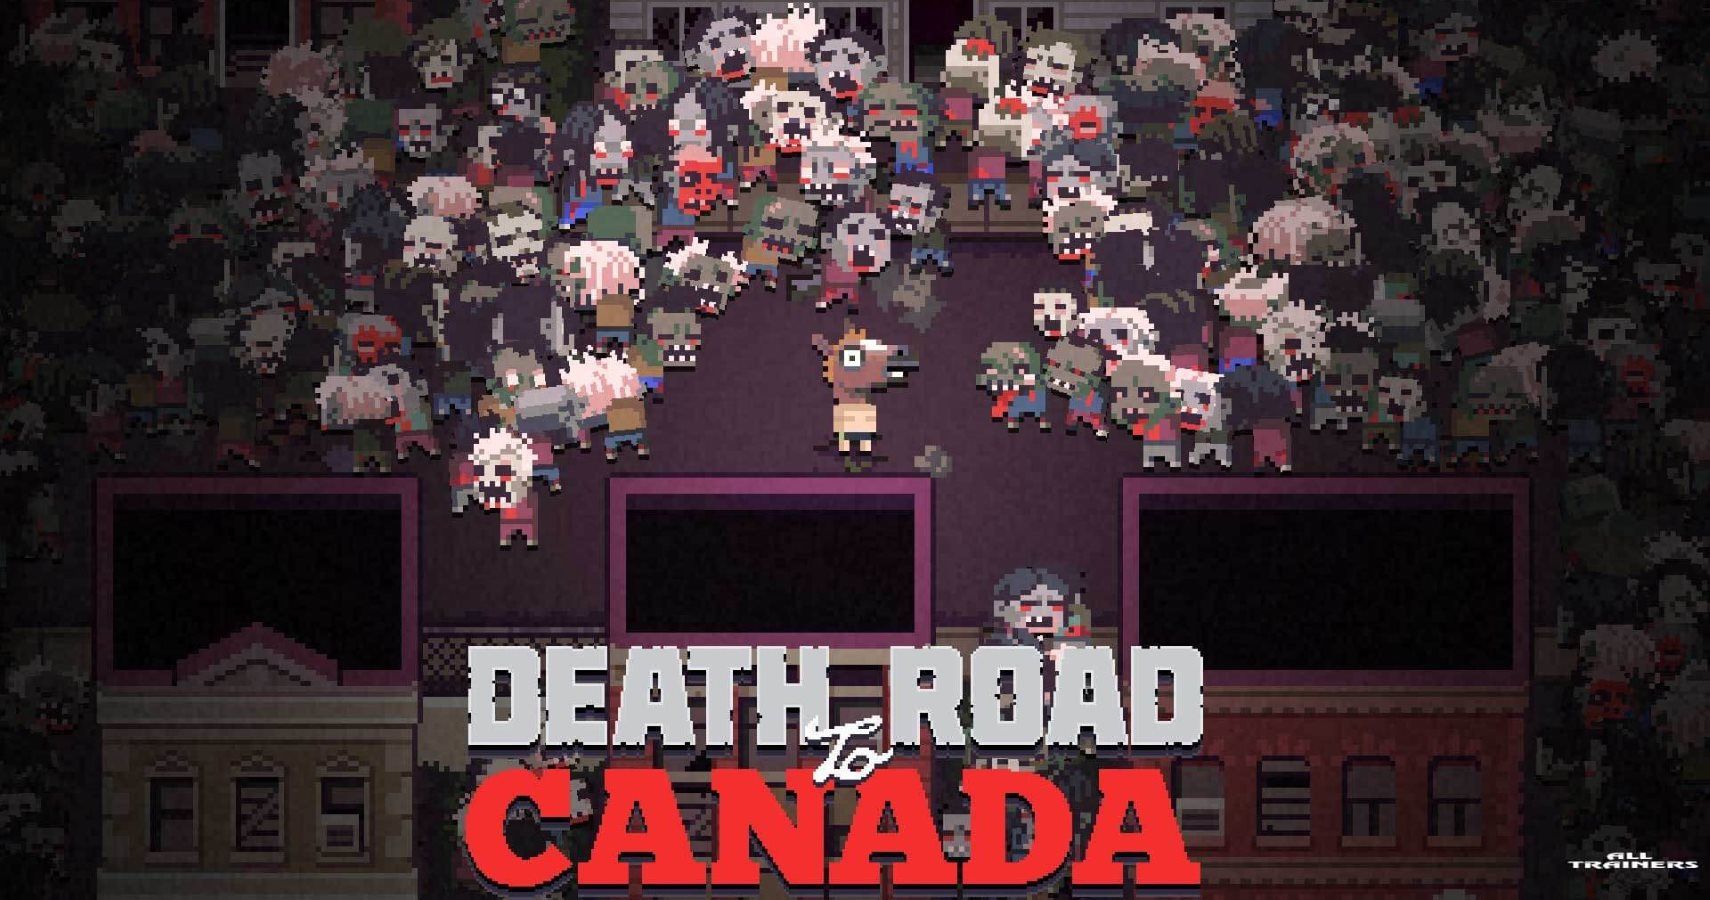 Death Road To Canada Delayed After Toronto Attack Would Have Been Insensitive